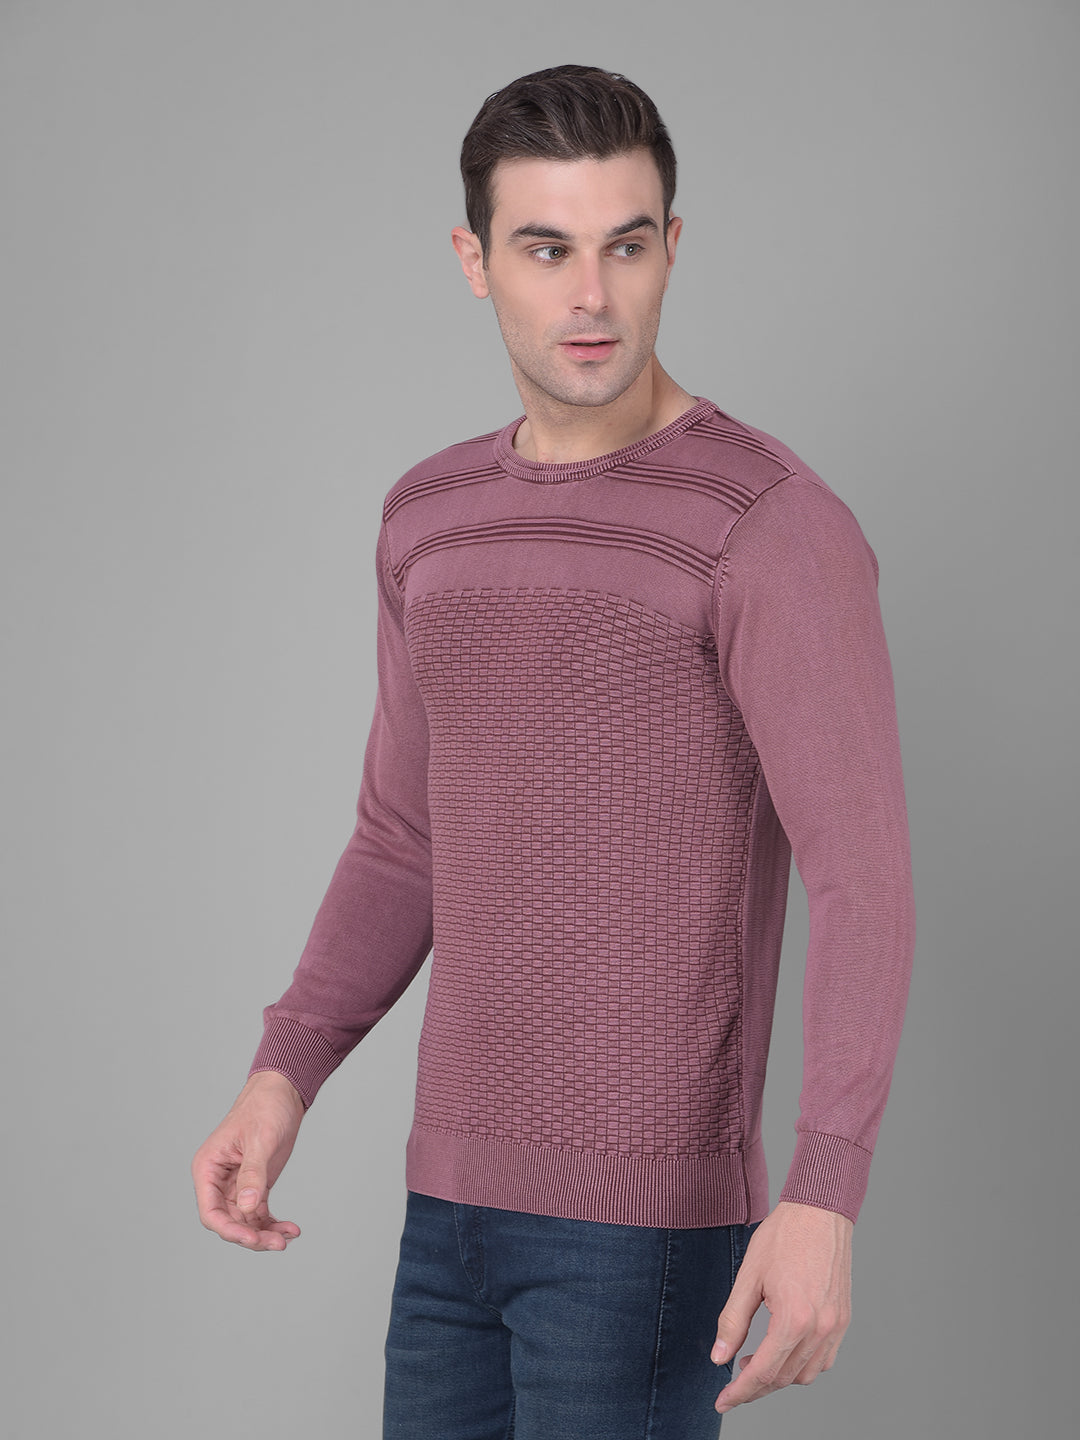 cobb solid coral pattern round neck sweater